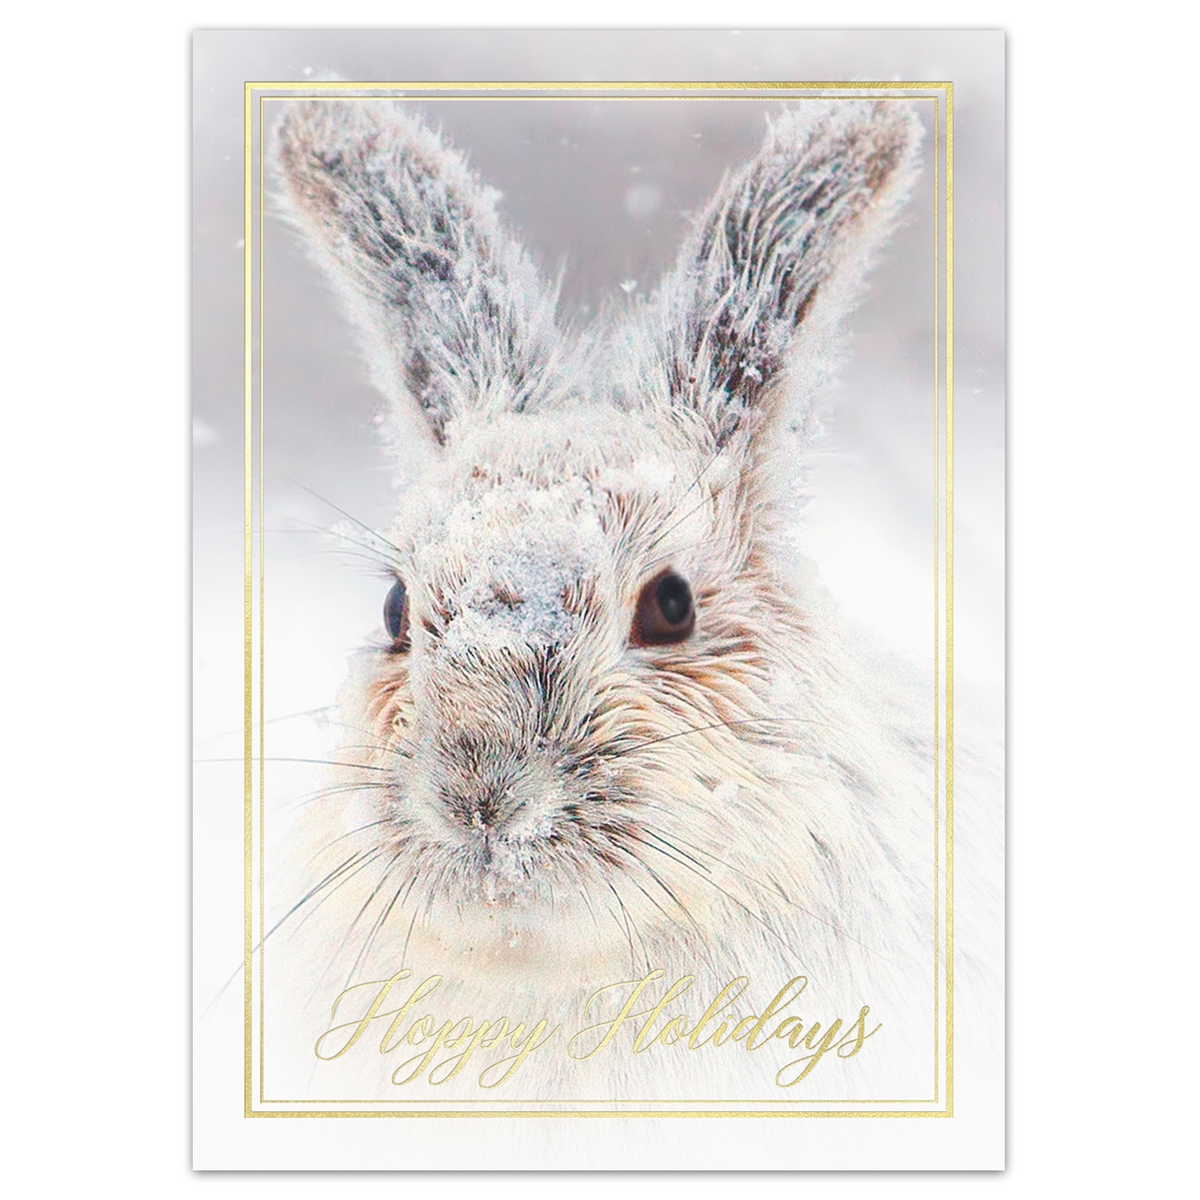 Snowshoe Hare Holiday Cards